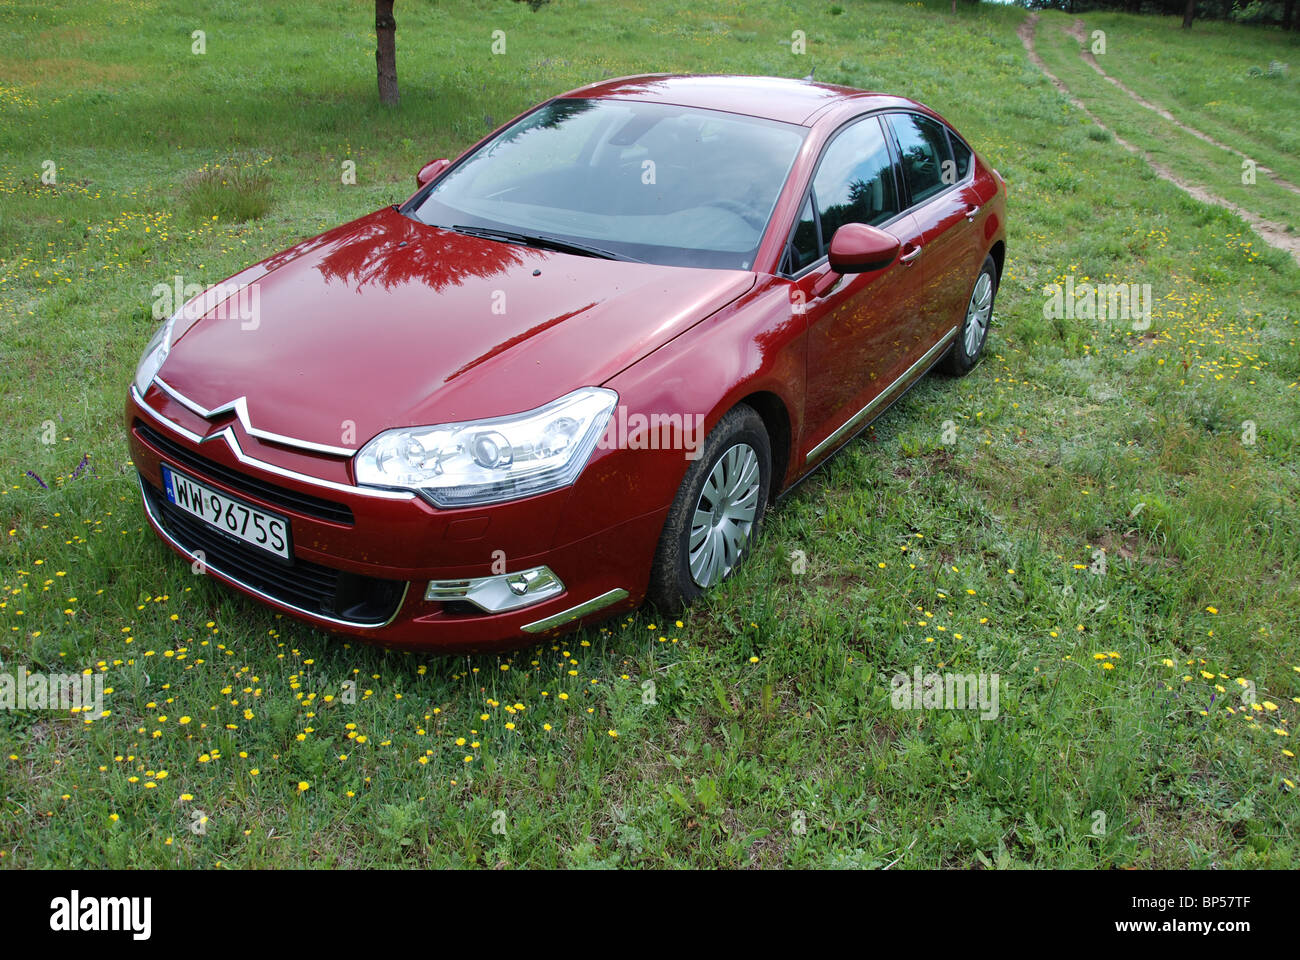 Citroen C5 2.0 HDI - MY 2008 - red metallic - five doors - French popular  higher middle class car, segment D - on meadow Stock Photo - Alamy